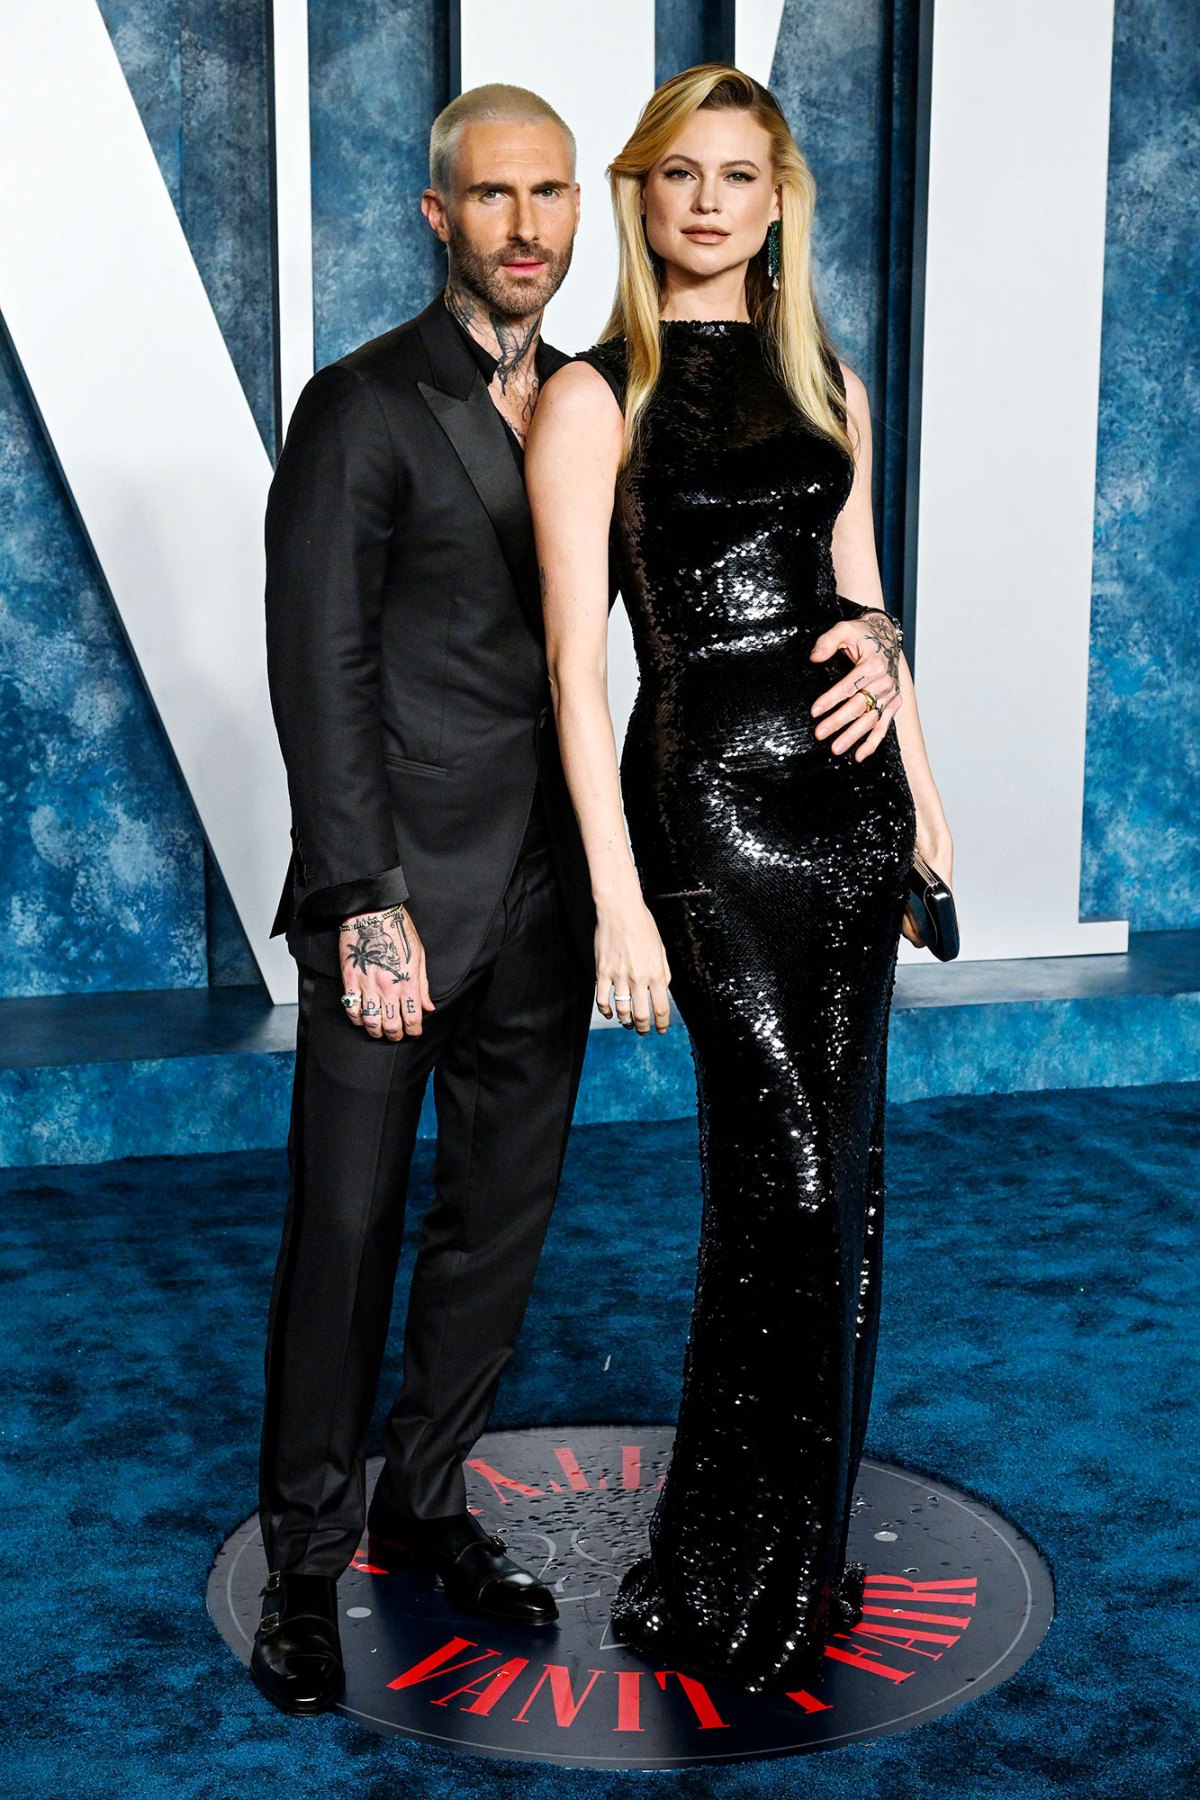 Adam Levine's dating history: His wife and ex-girlfriends